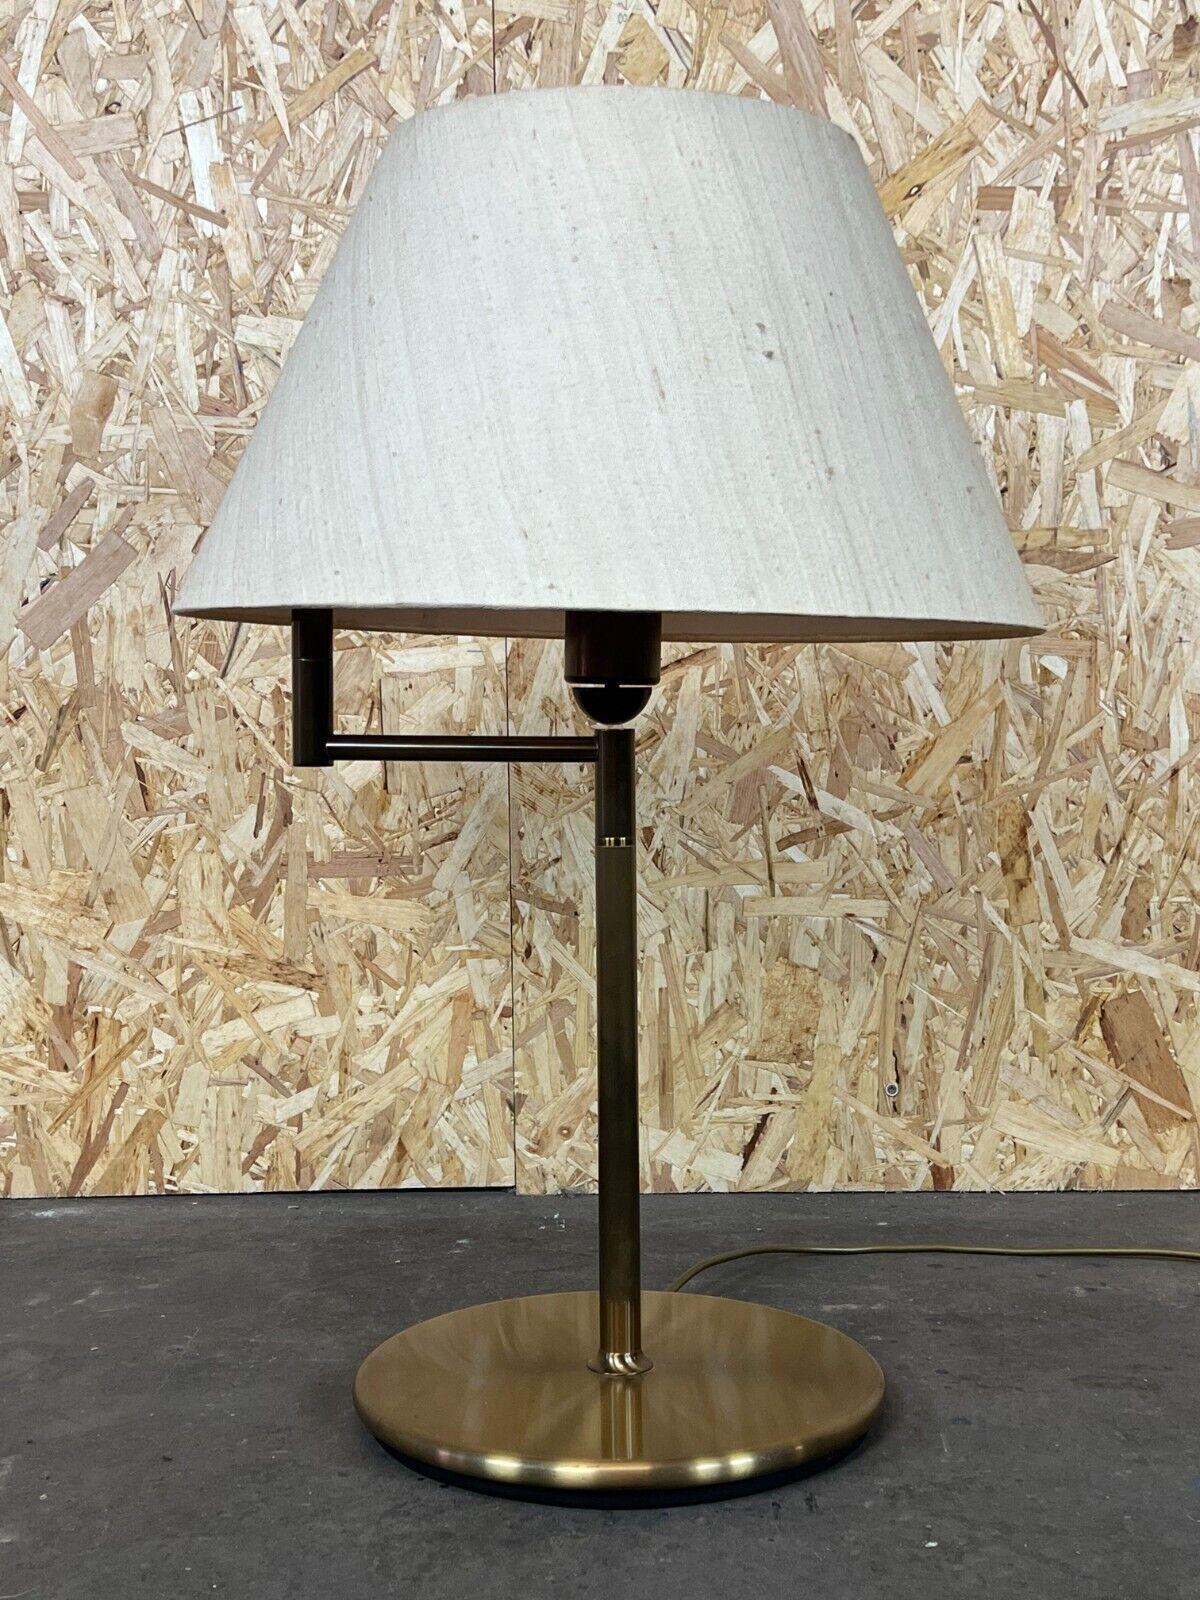 German 60s 70s Lamp Light Table Lamp Brass Swivel Space Age Design For Sale